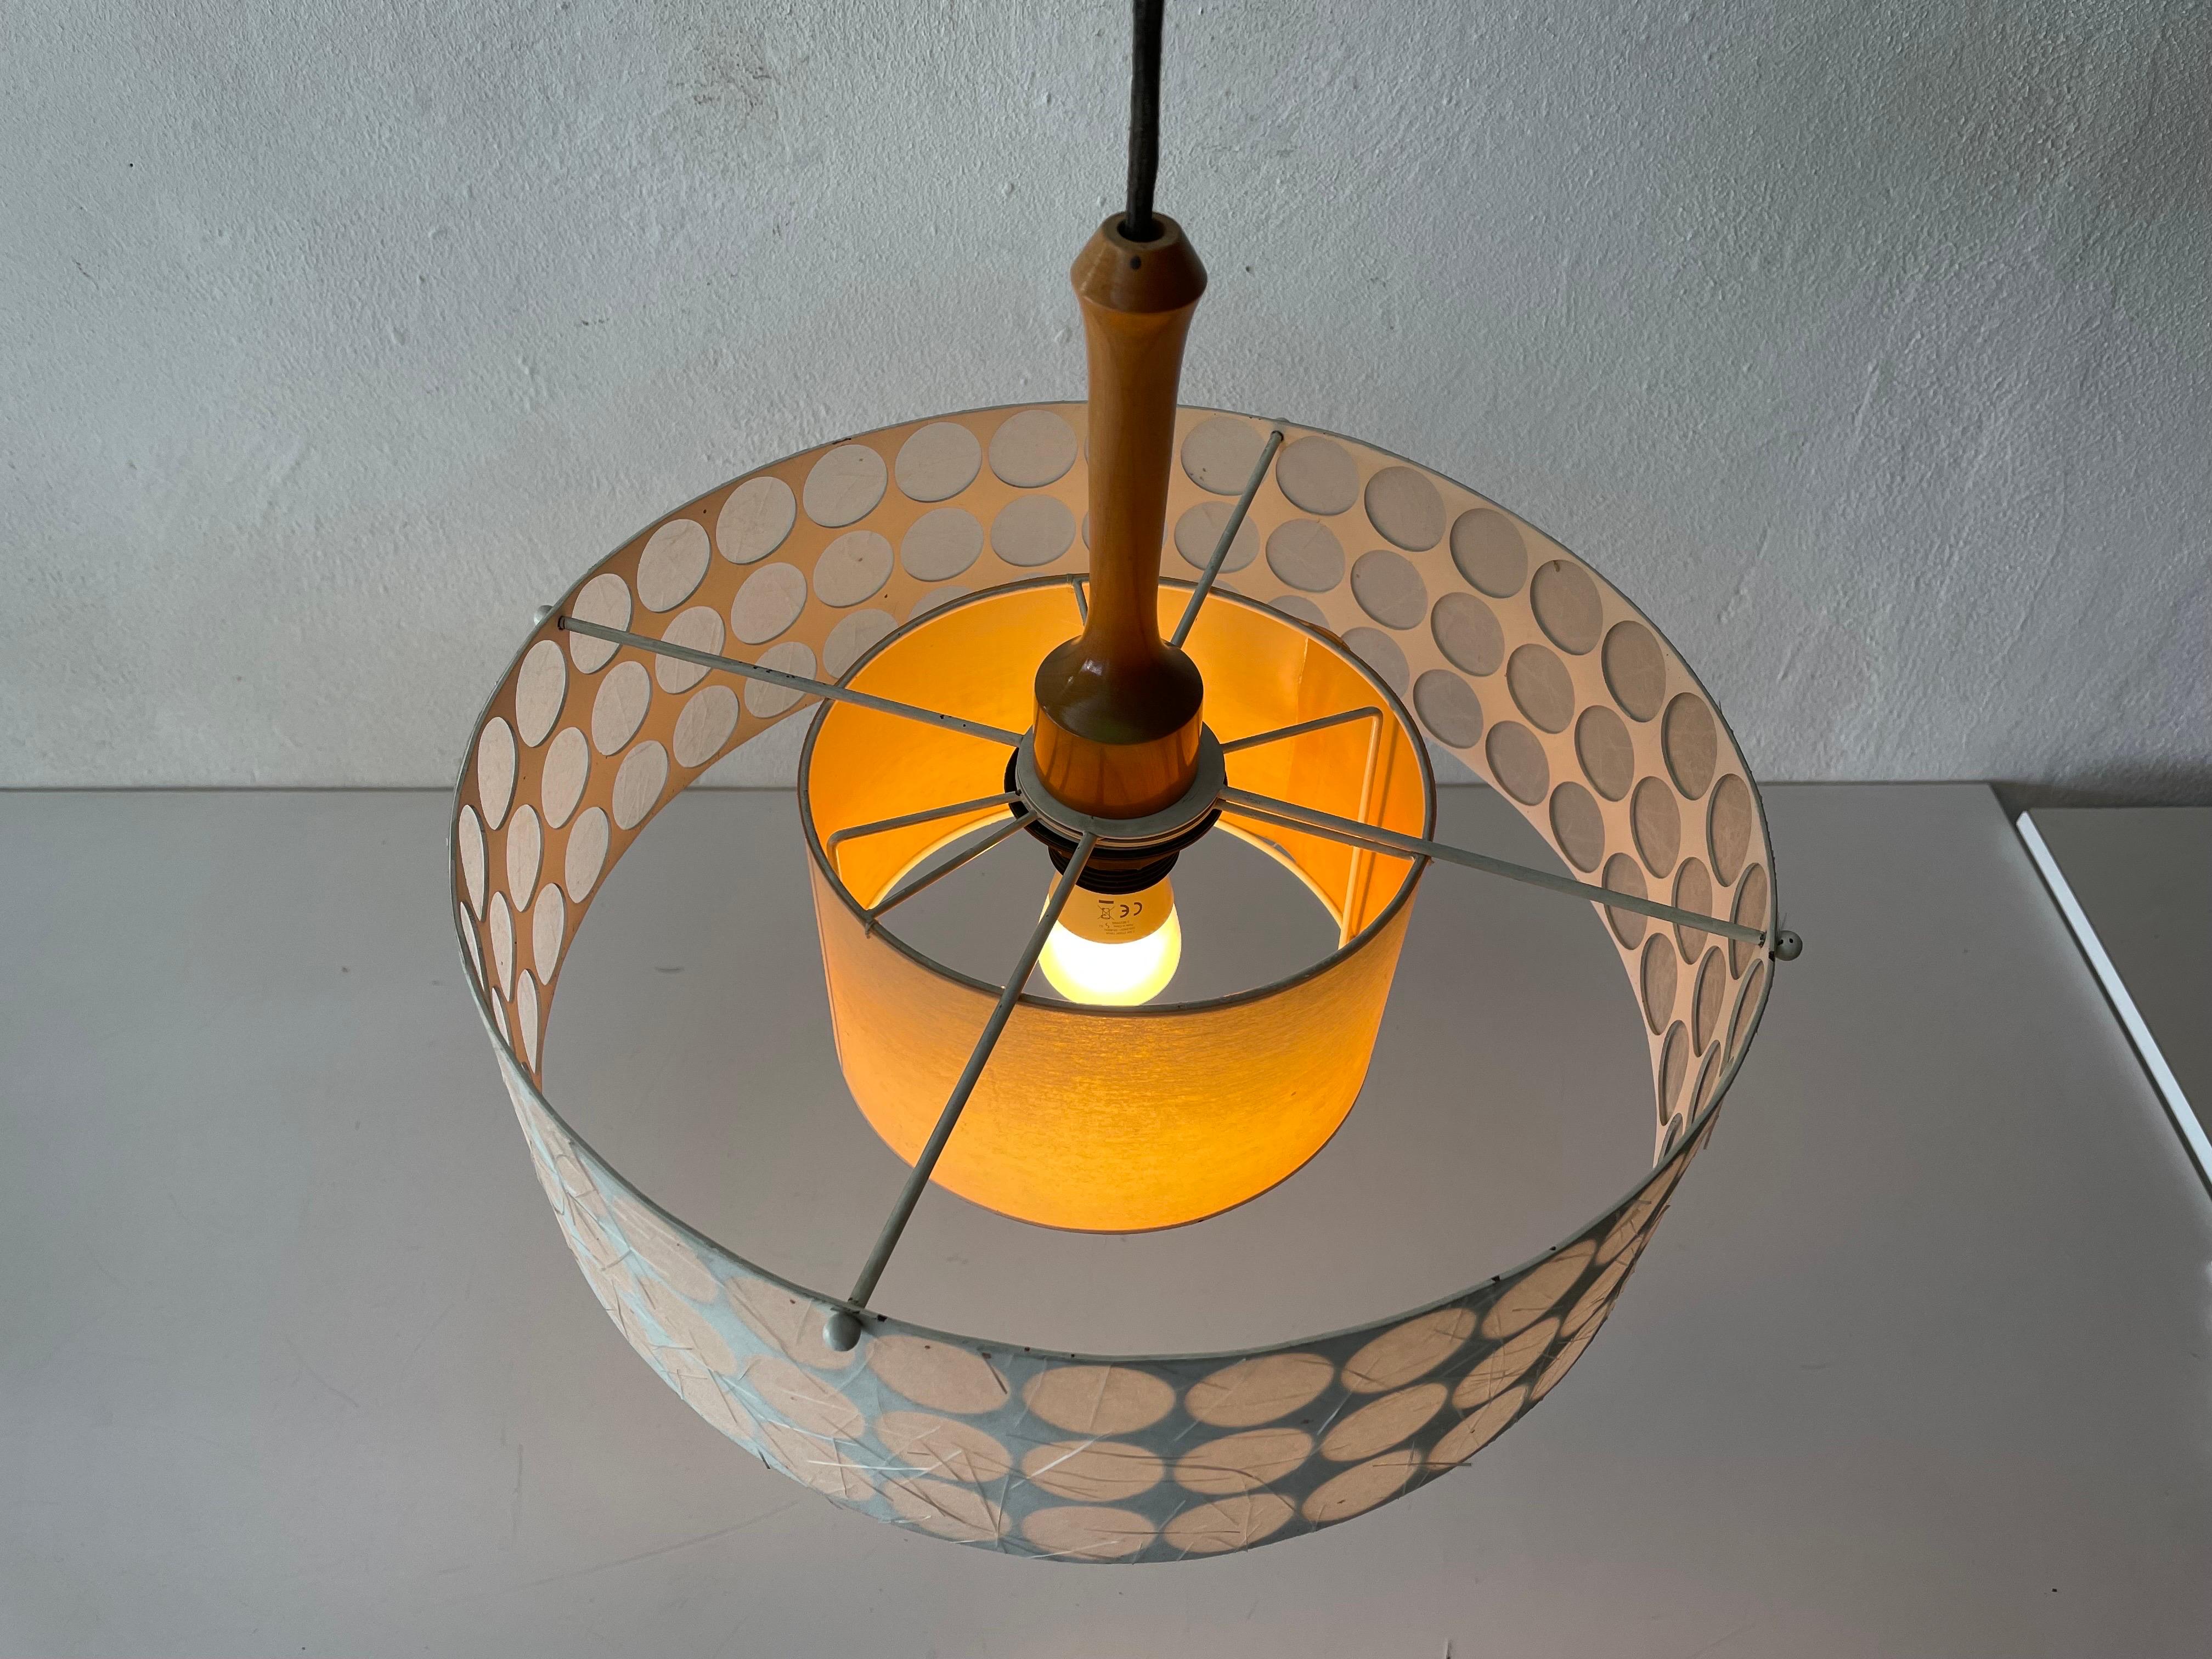 Rare Atomic Shade Pendant Lamp by Temde, 1960s, Switzerland For Sale 10